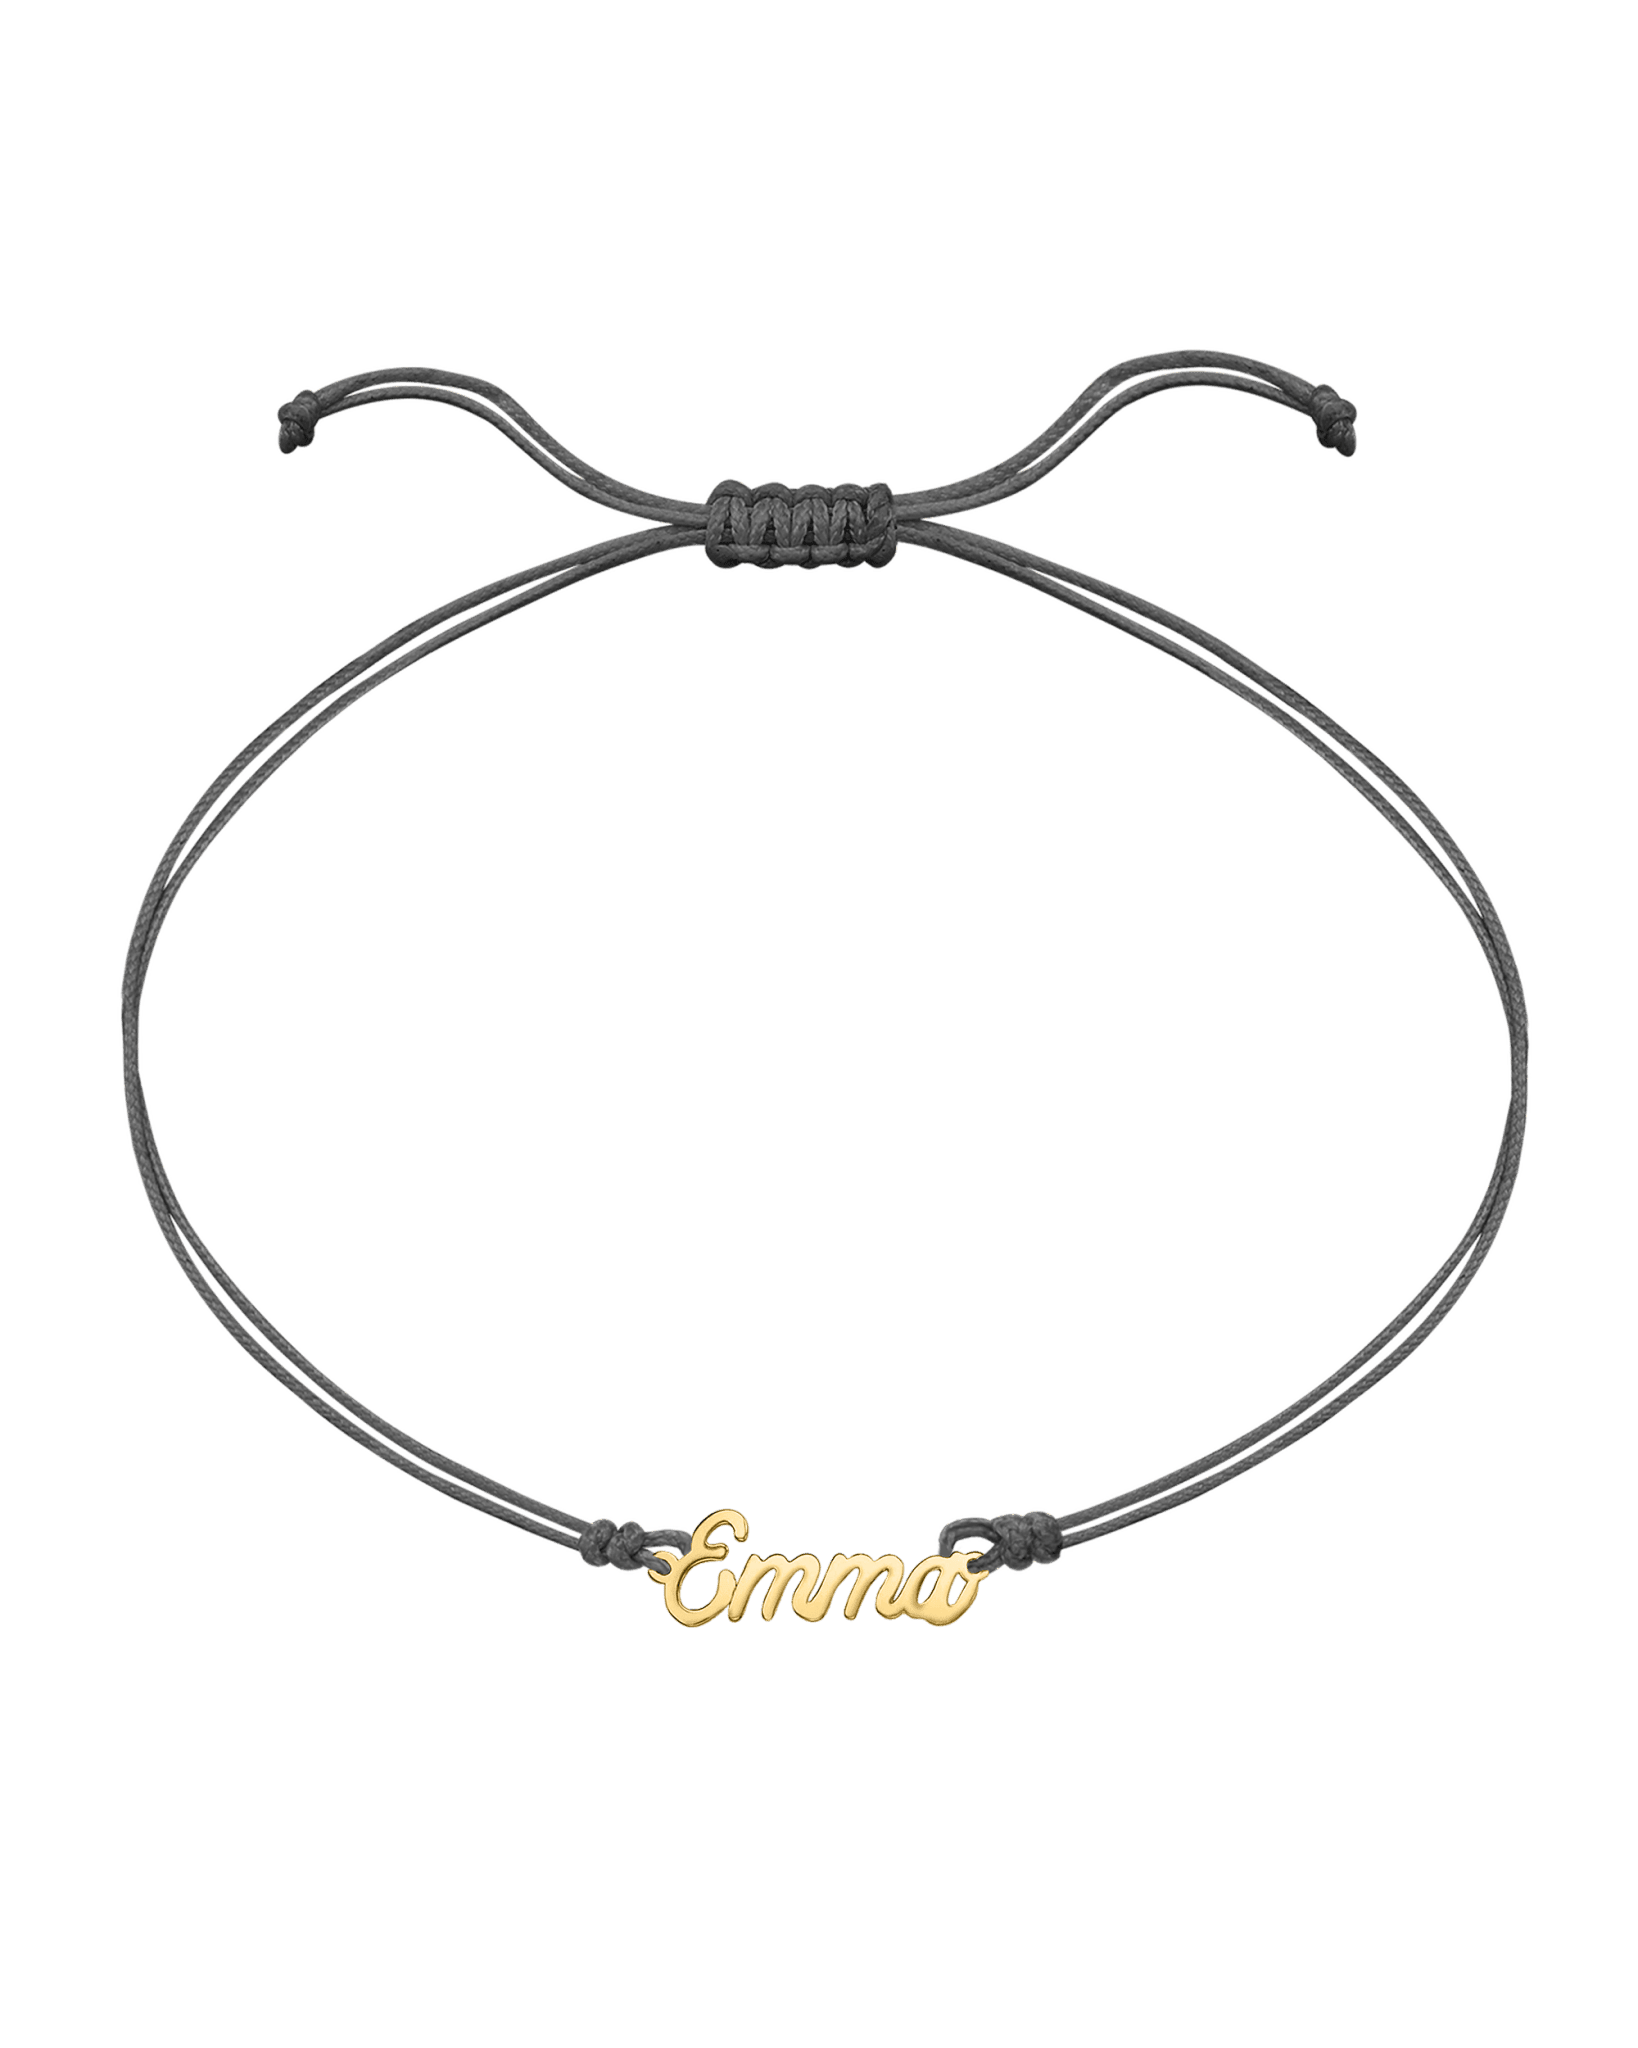 Name Plate String of Love - 14K Yellow Gold Bracelets 14K Solid Gold Grey 1 